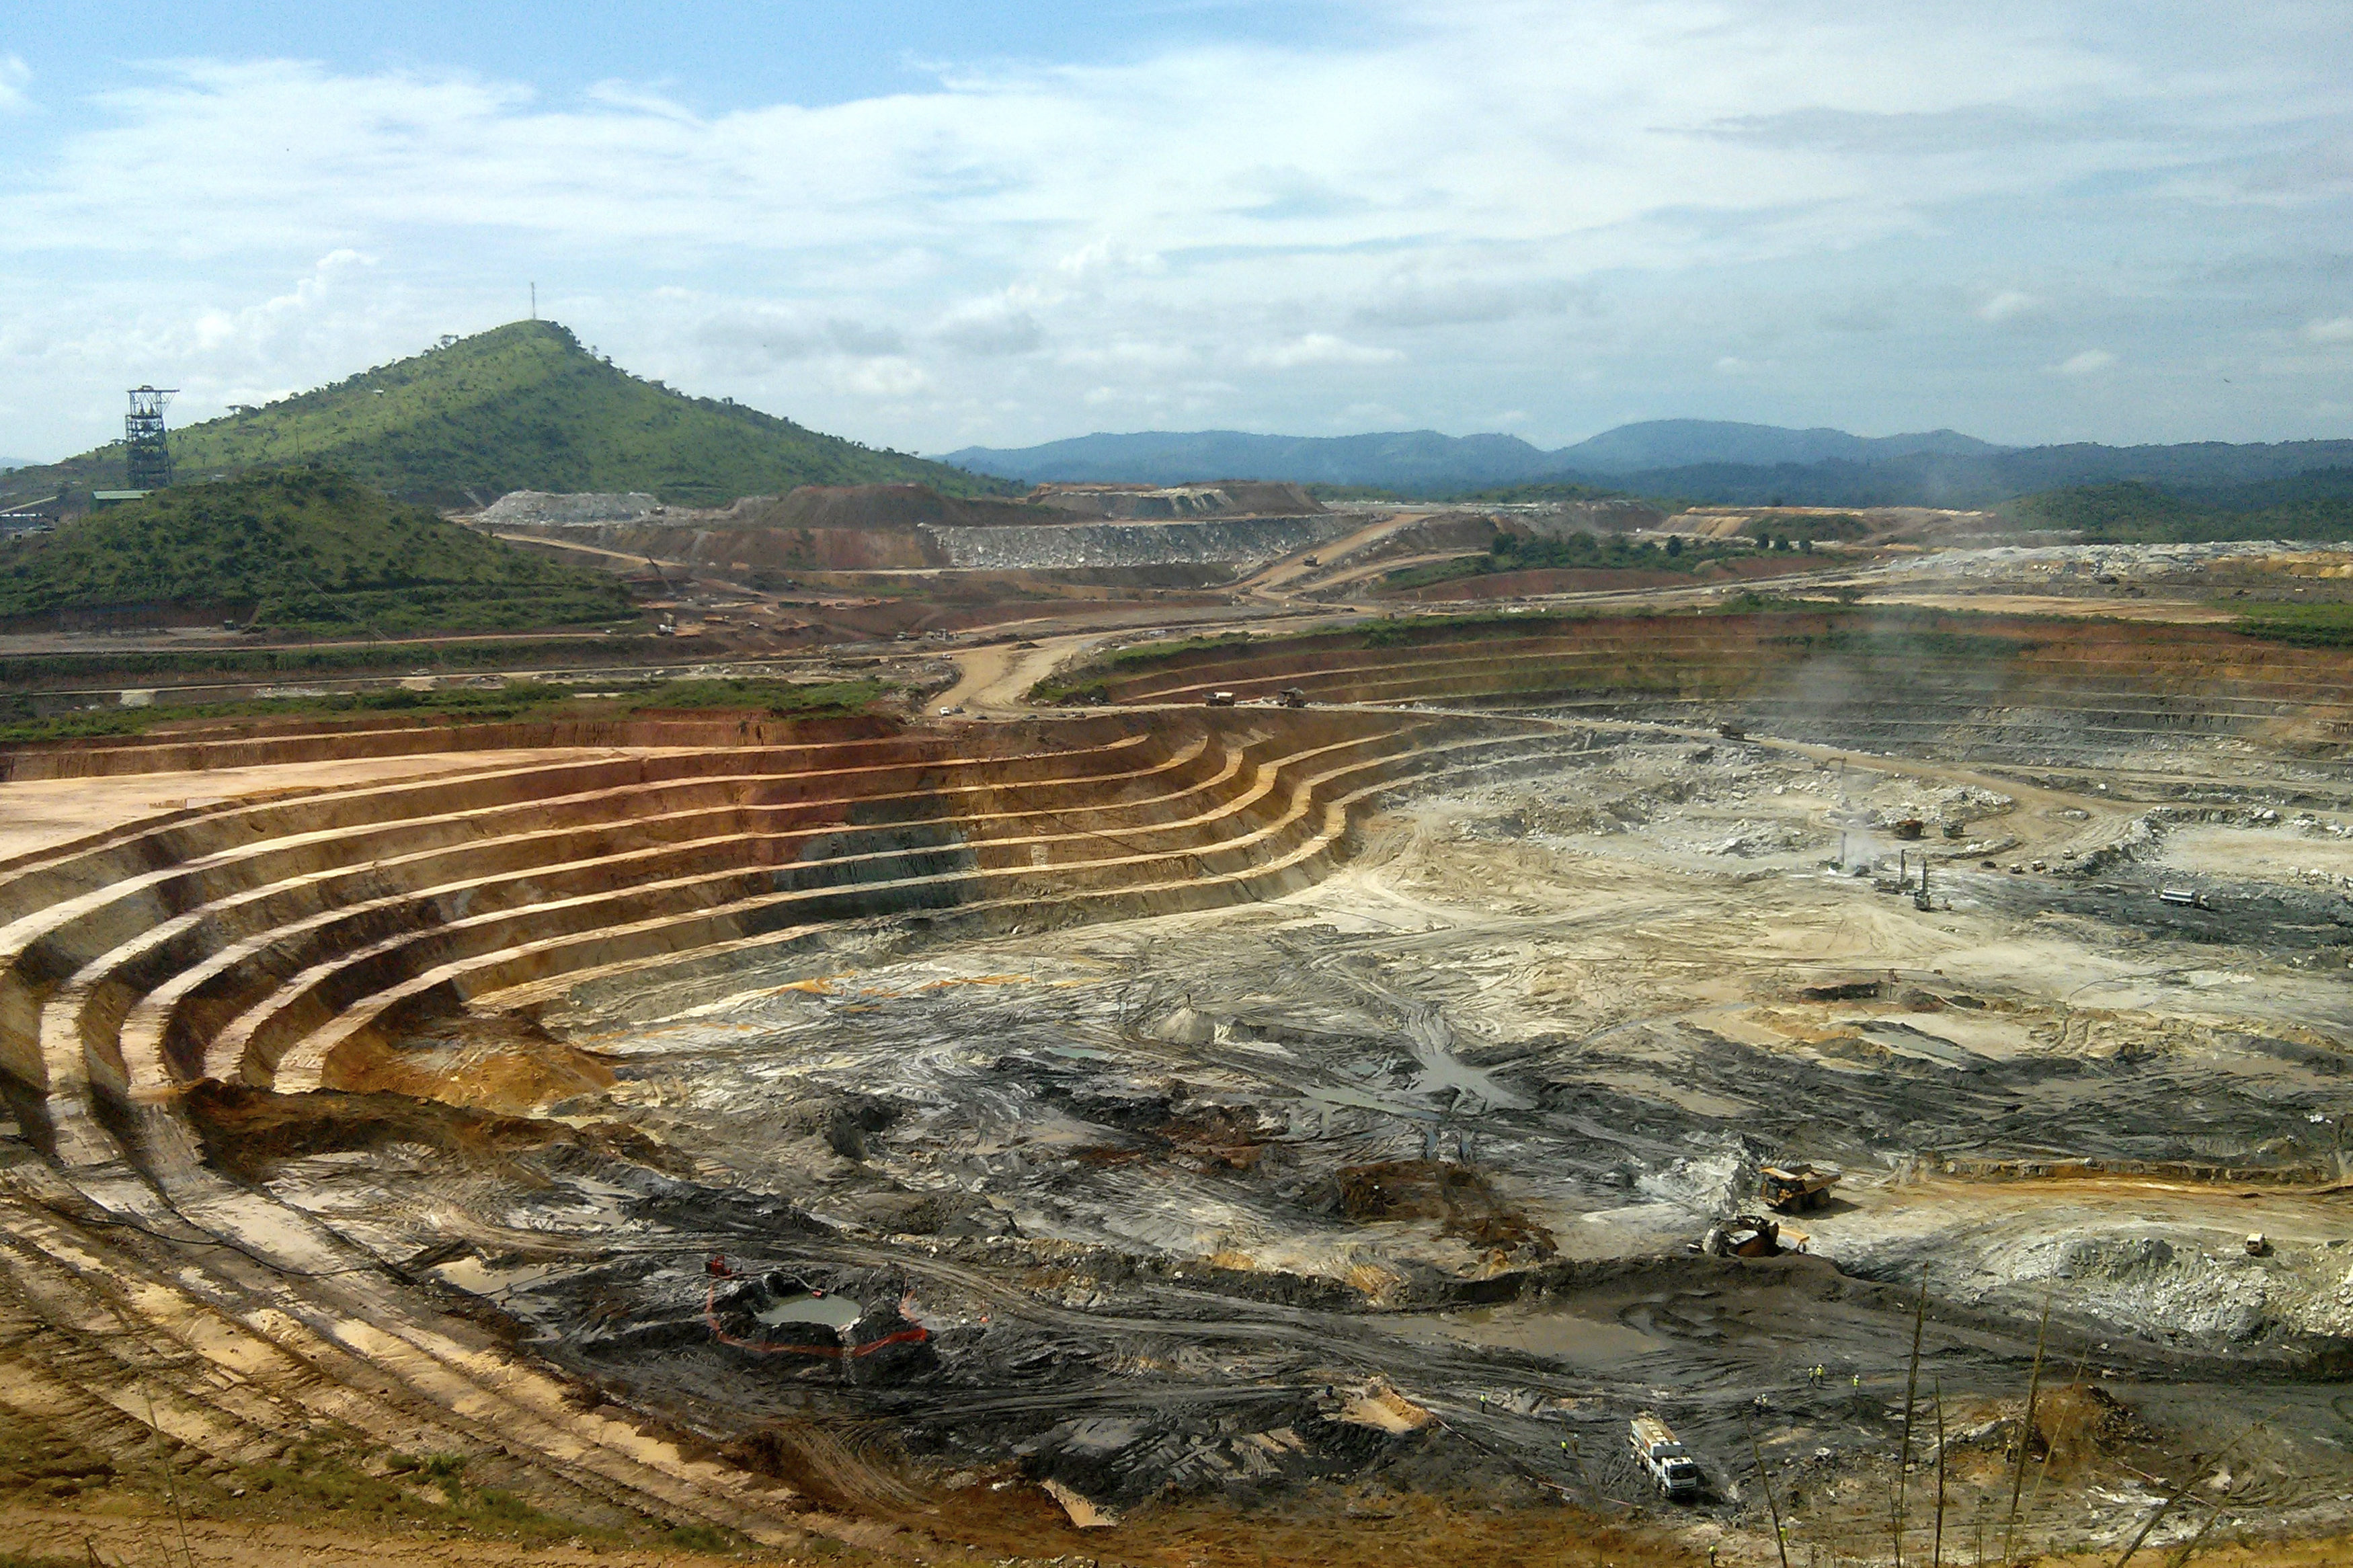 The KCD open pit gold mine at the Kibali mining site in northeast Democratic Republic of Congo, May 1, 2014. (Reuters)